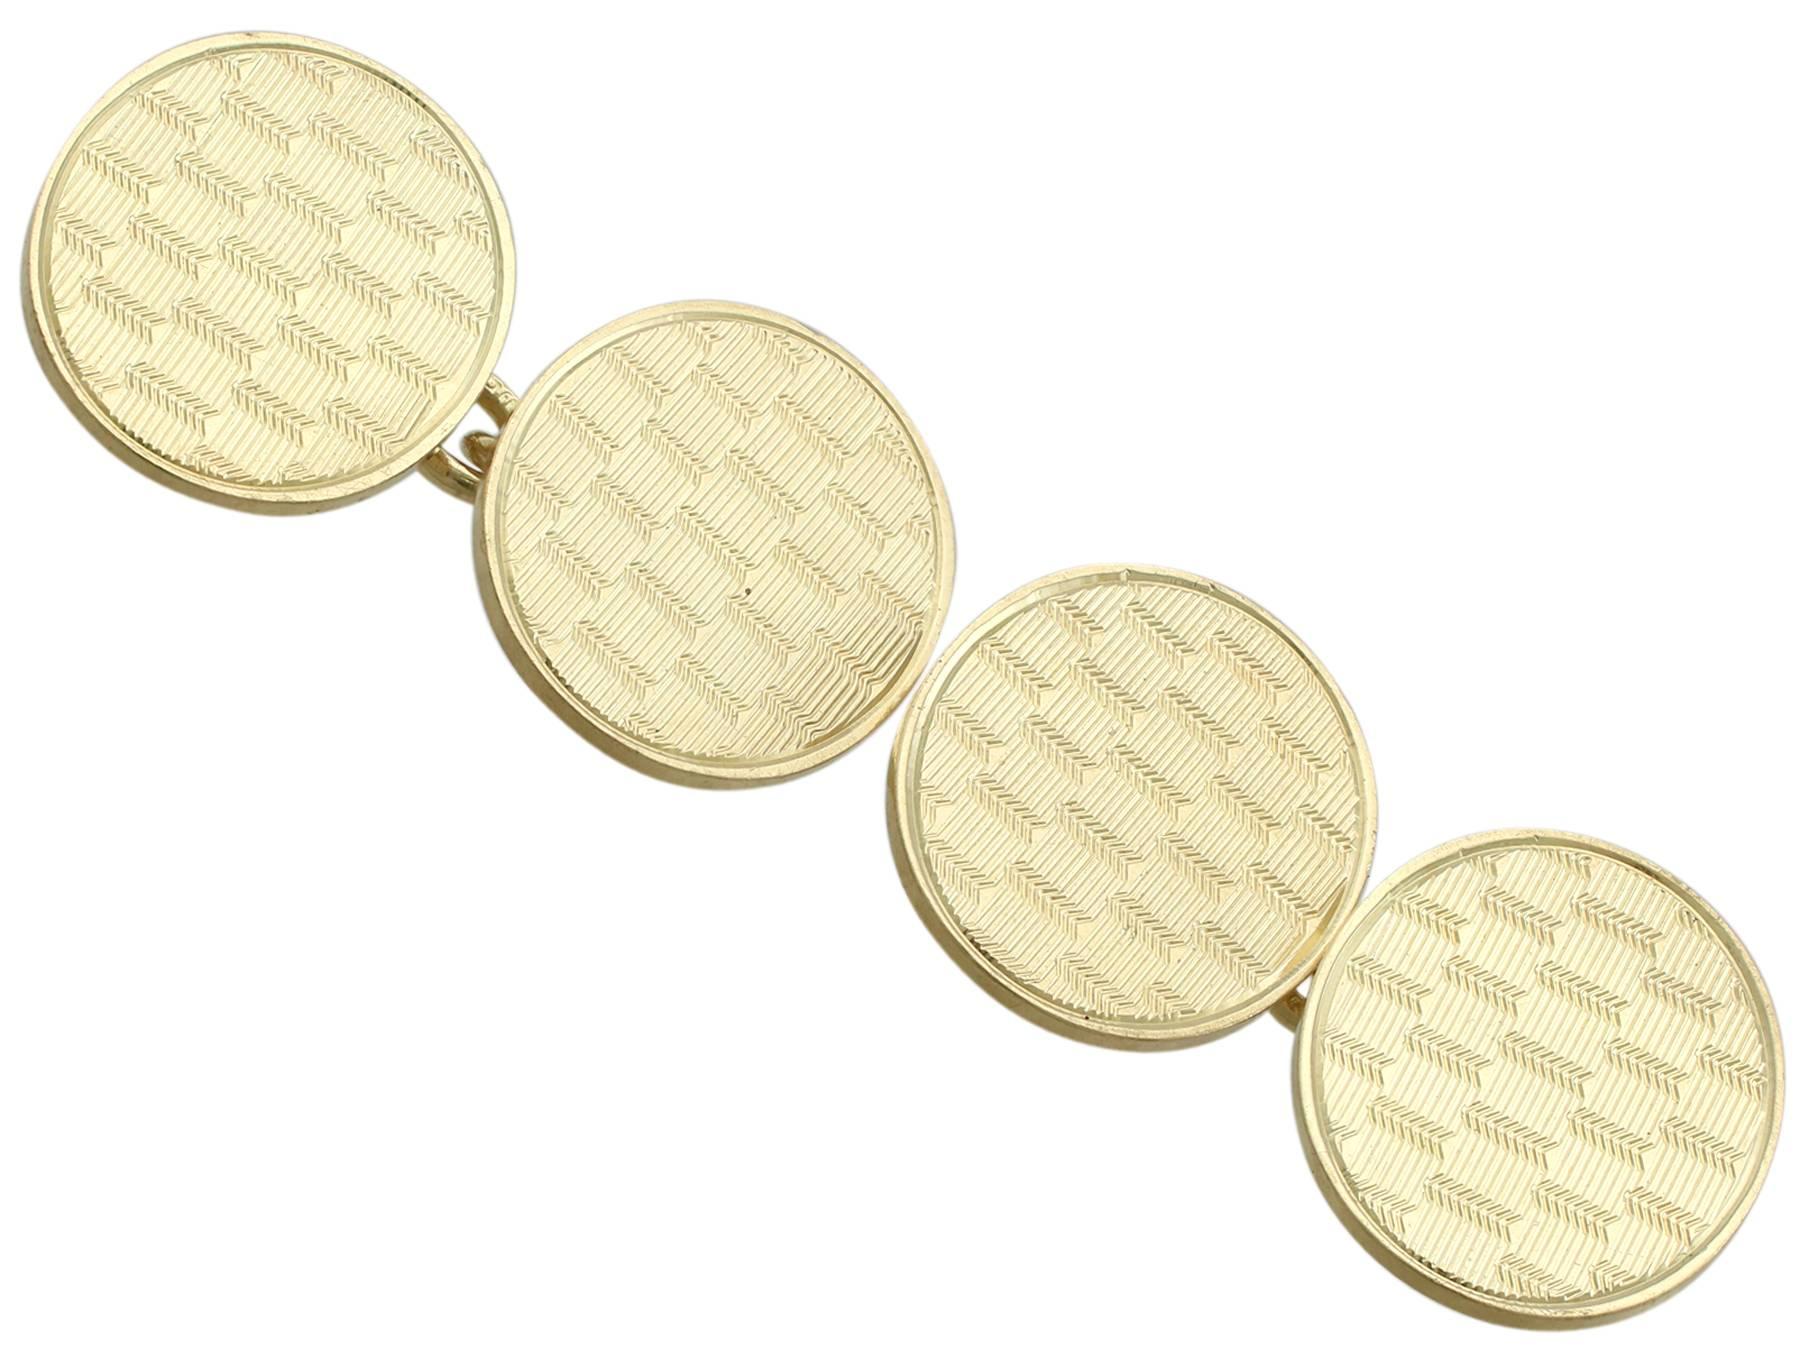 An impressive pair of antique 18 carat yellow gold cufflinks; part of 's diverse antique estate jewelry collections.

The fine and impressive antique gold cufflinks for men have been crafted in 18 ct yellow gold.

The links have an oval form, the